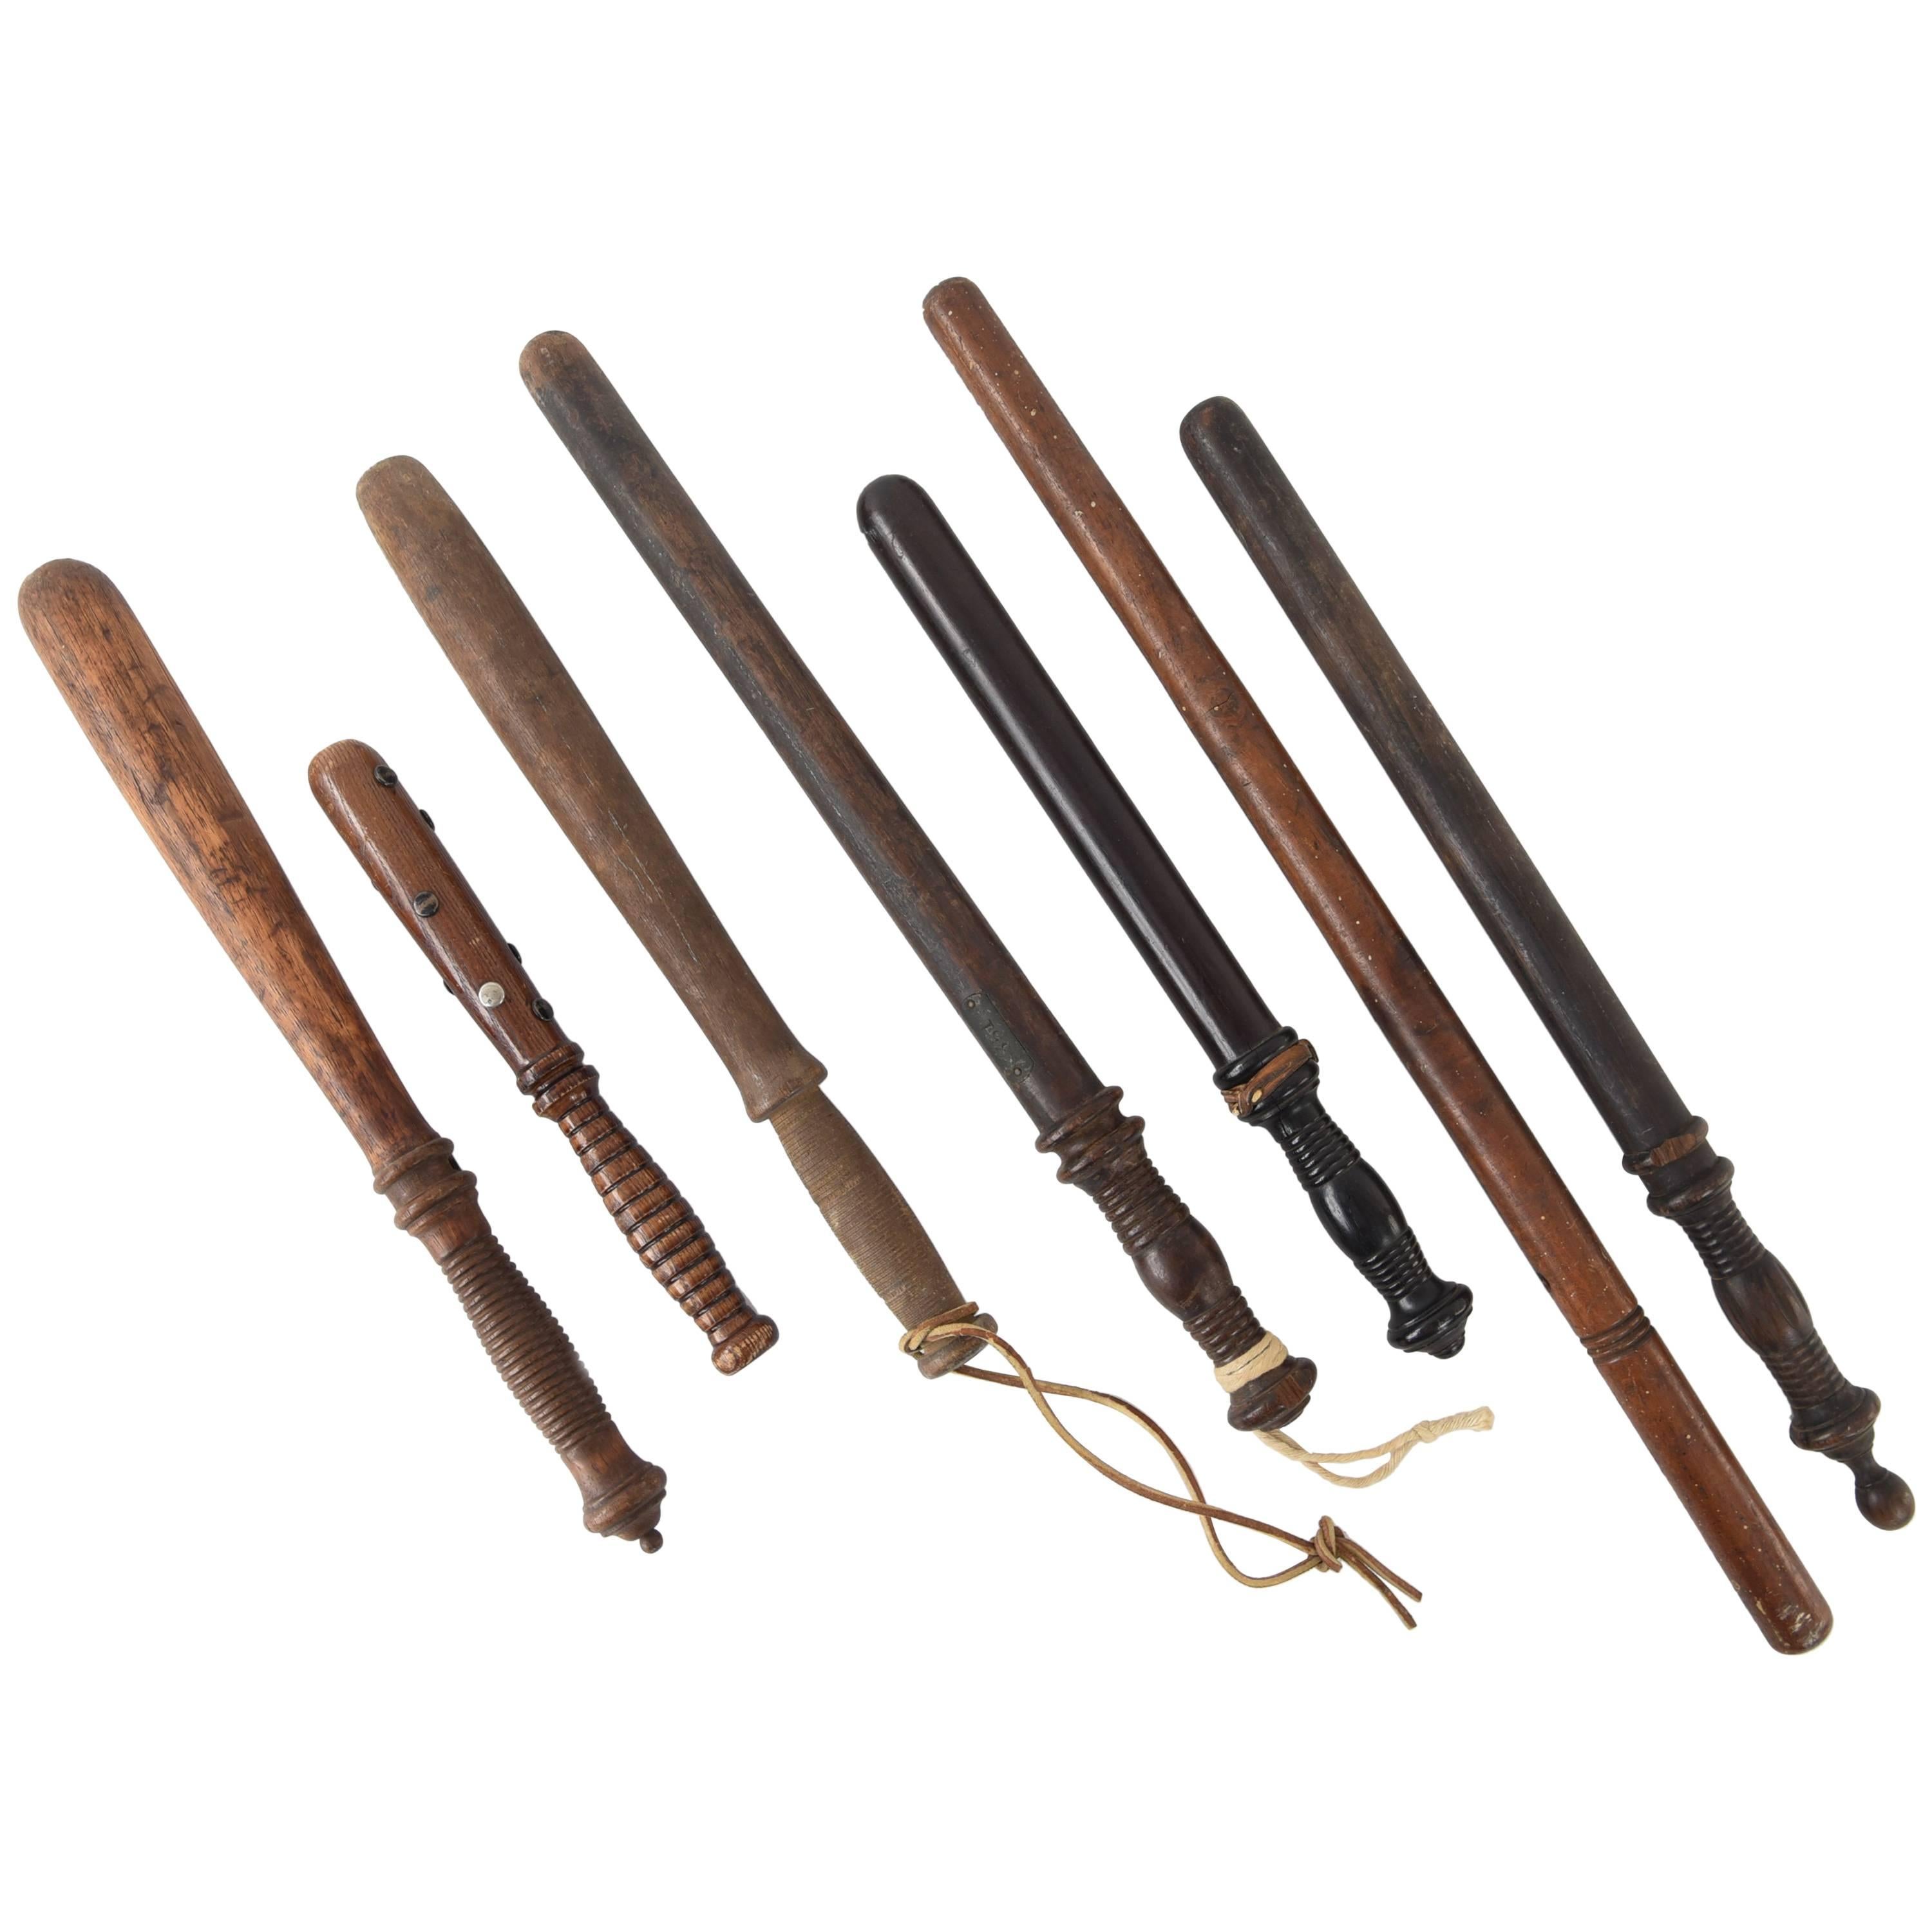 Collection of Vintage Billy Clubs, Batons or Nightsticks